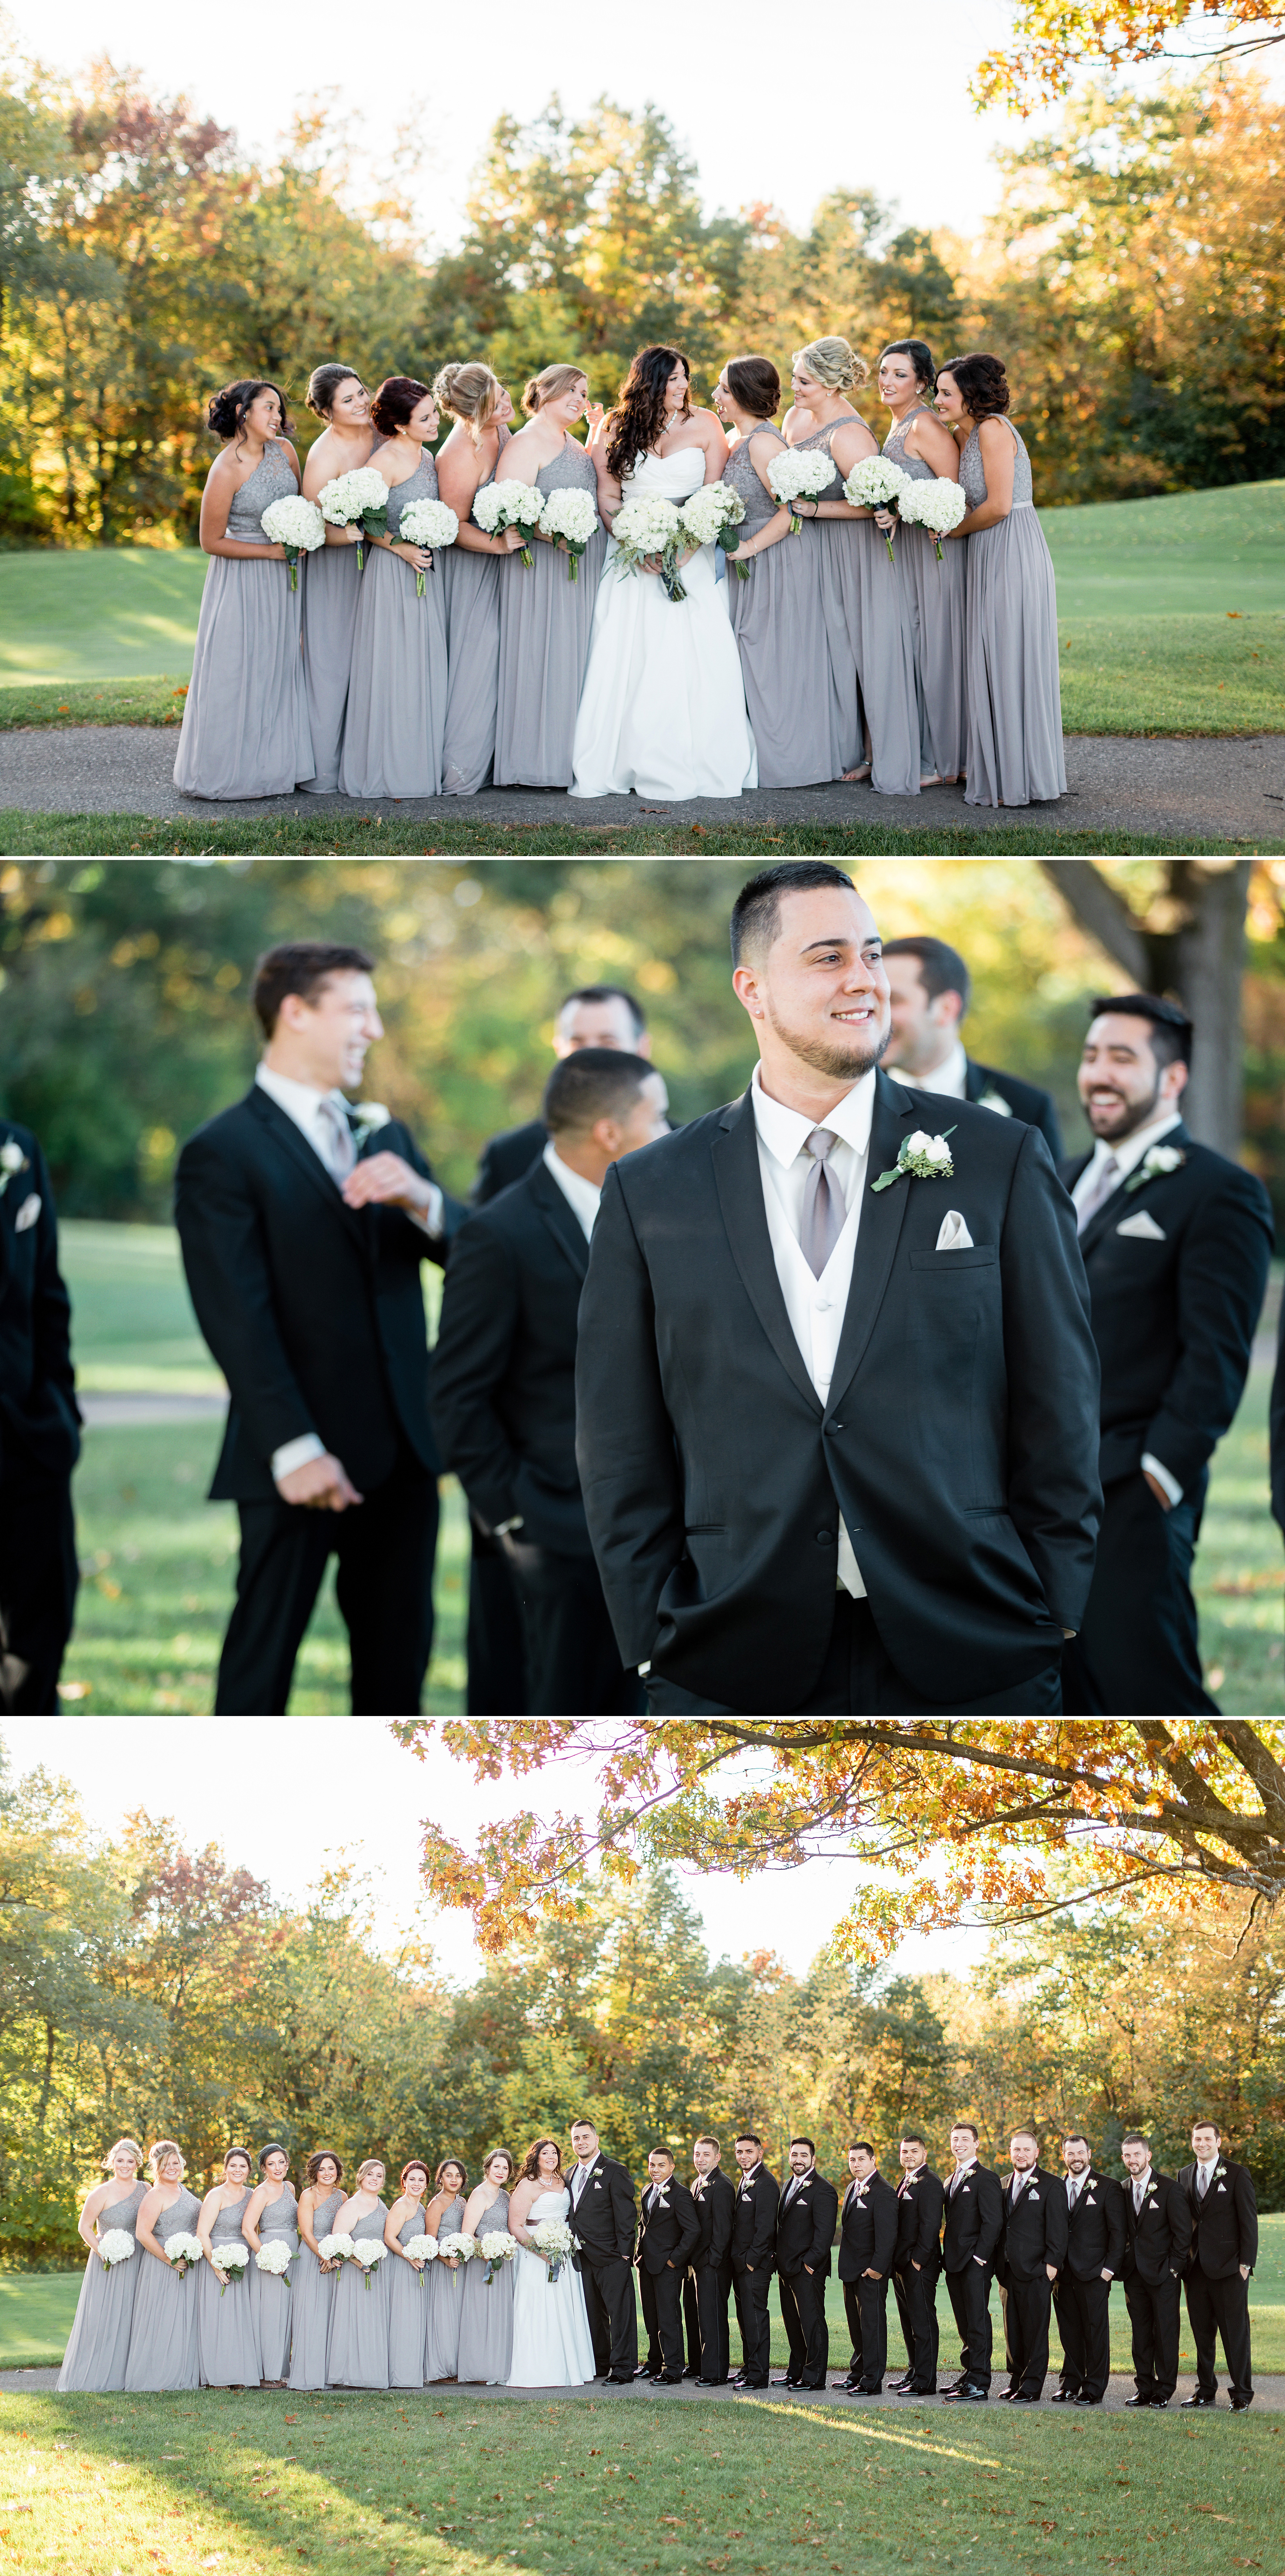 Bridal Party photos from a Paint Creek Country Club Wedding